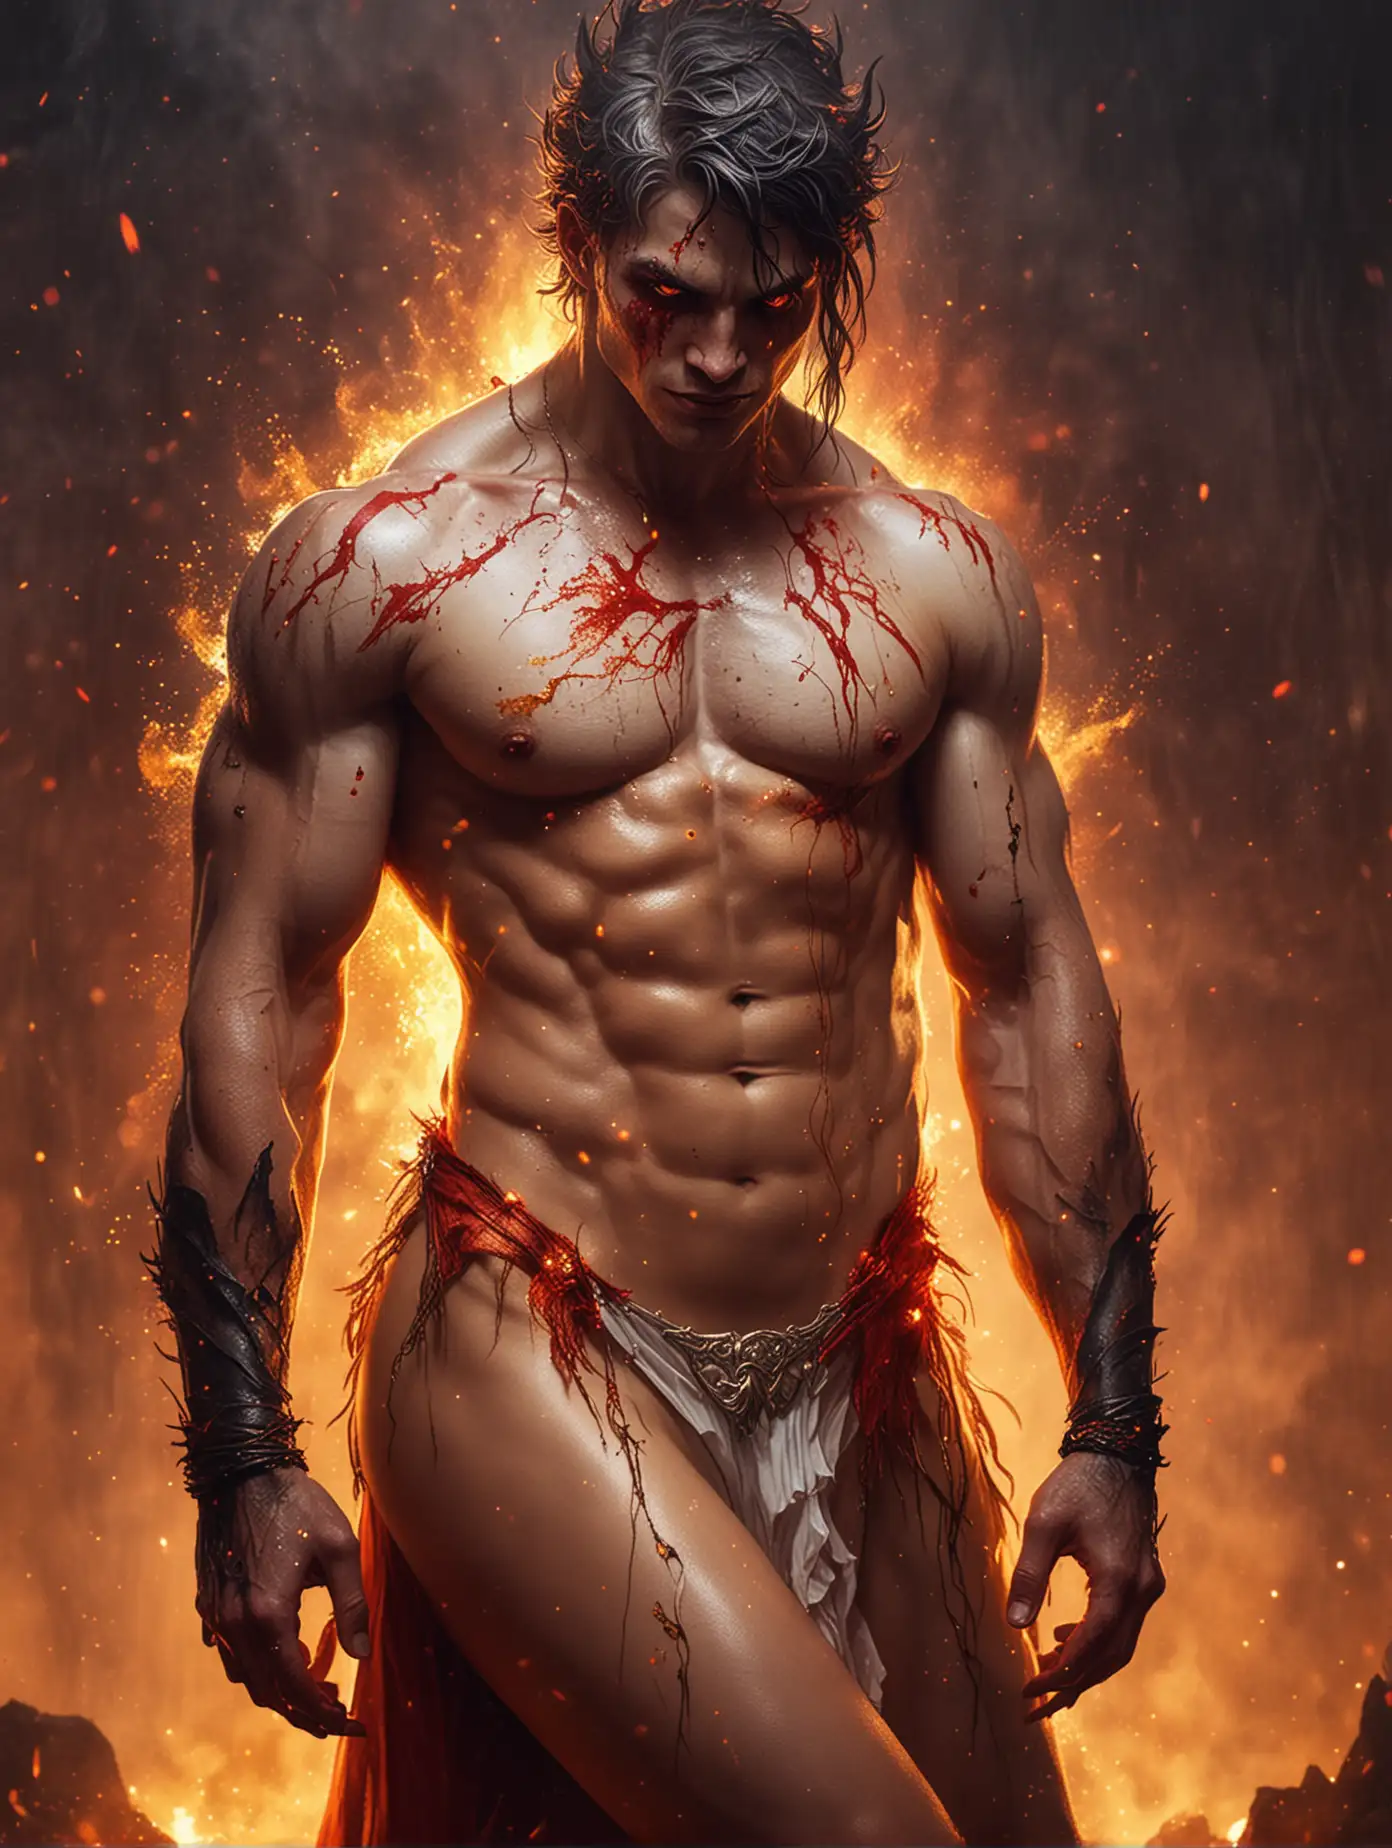 Illustration of a man evil hell monster, he has nice abs, red yellow skin, he is wearing a thong, he looks sexy, strong arms, shirtless, he is in an embrace with a beautiful fae woman who is wearing a short white dress, red fog, flakes, gold sparks